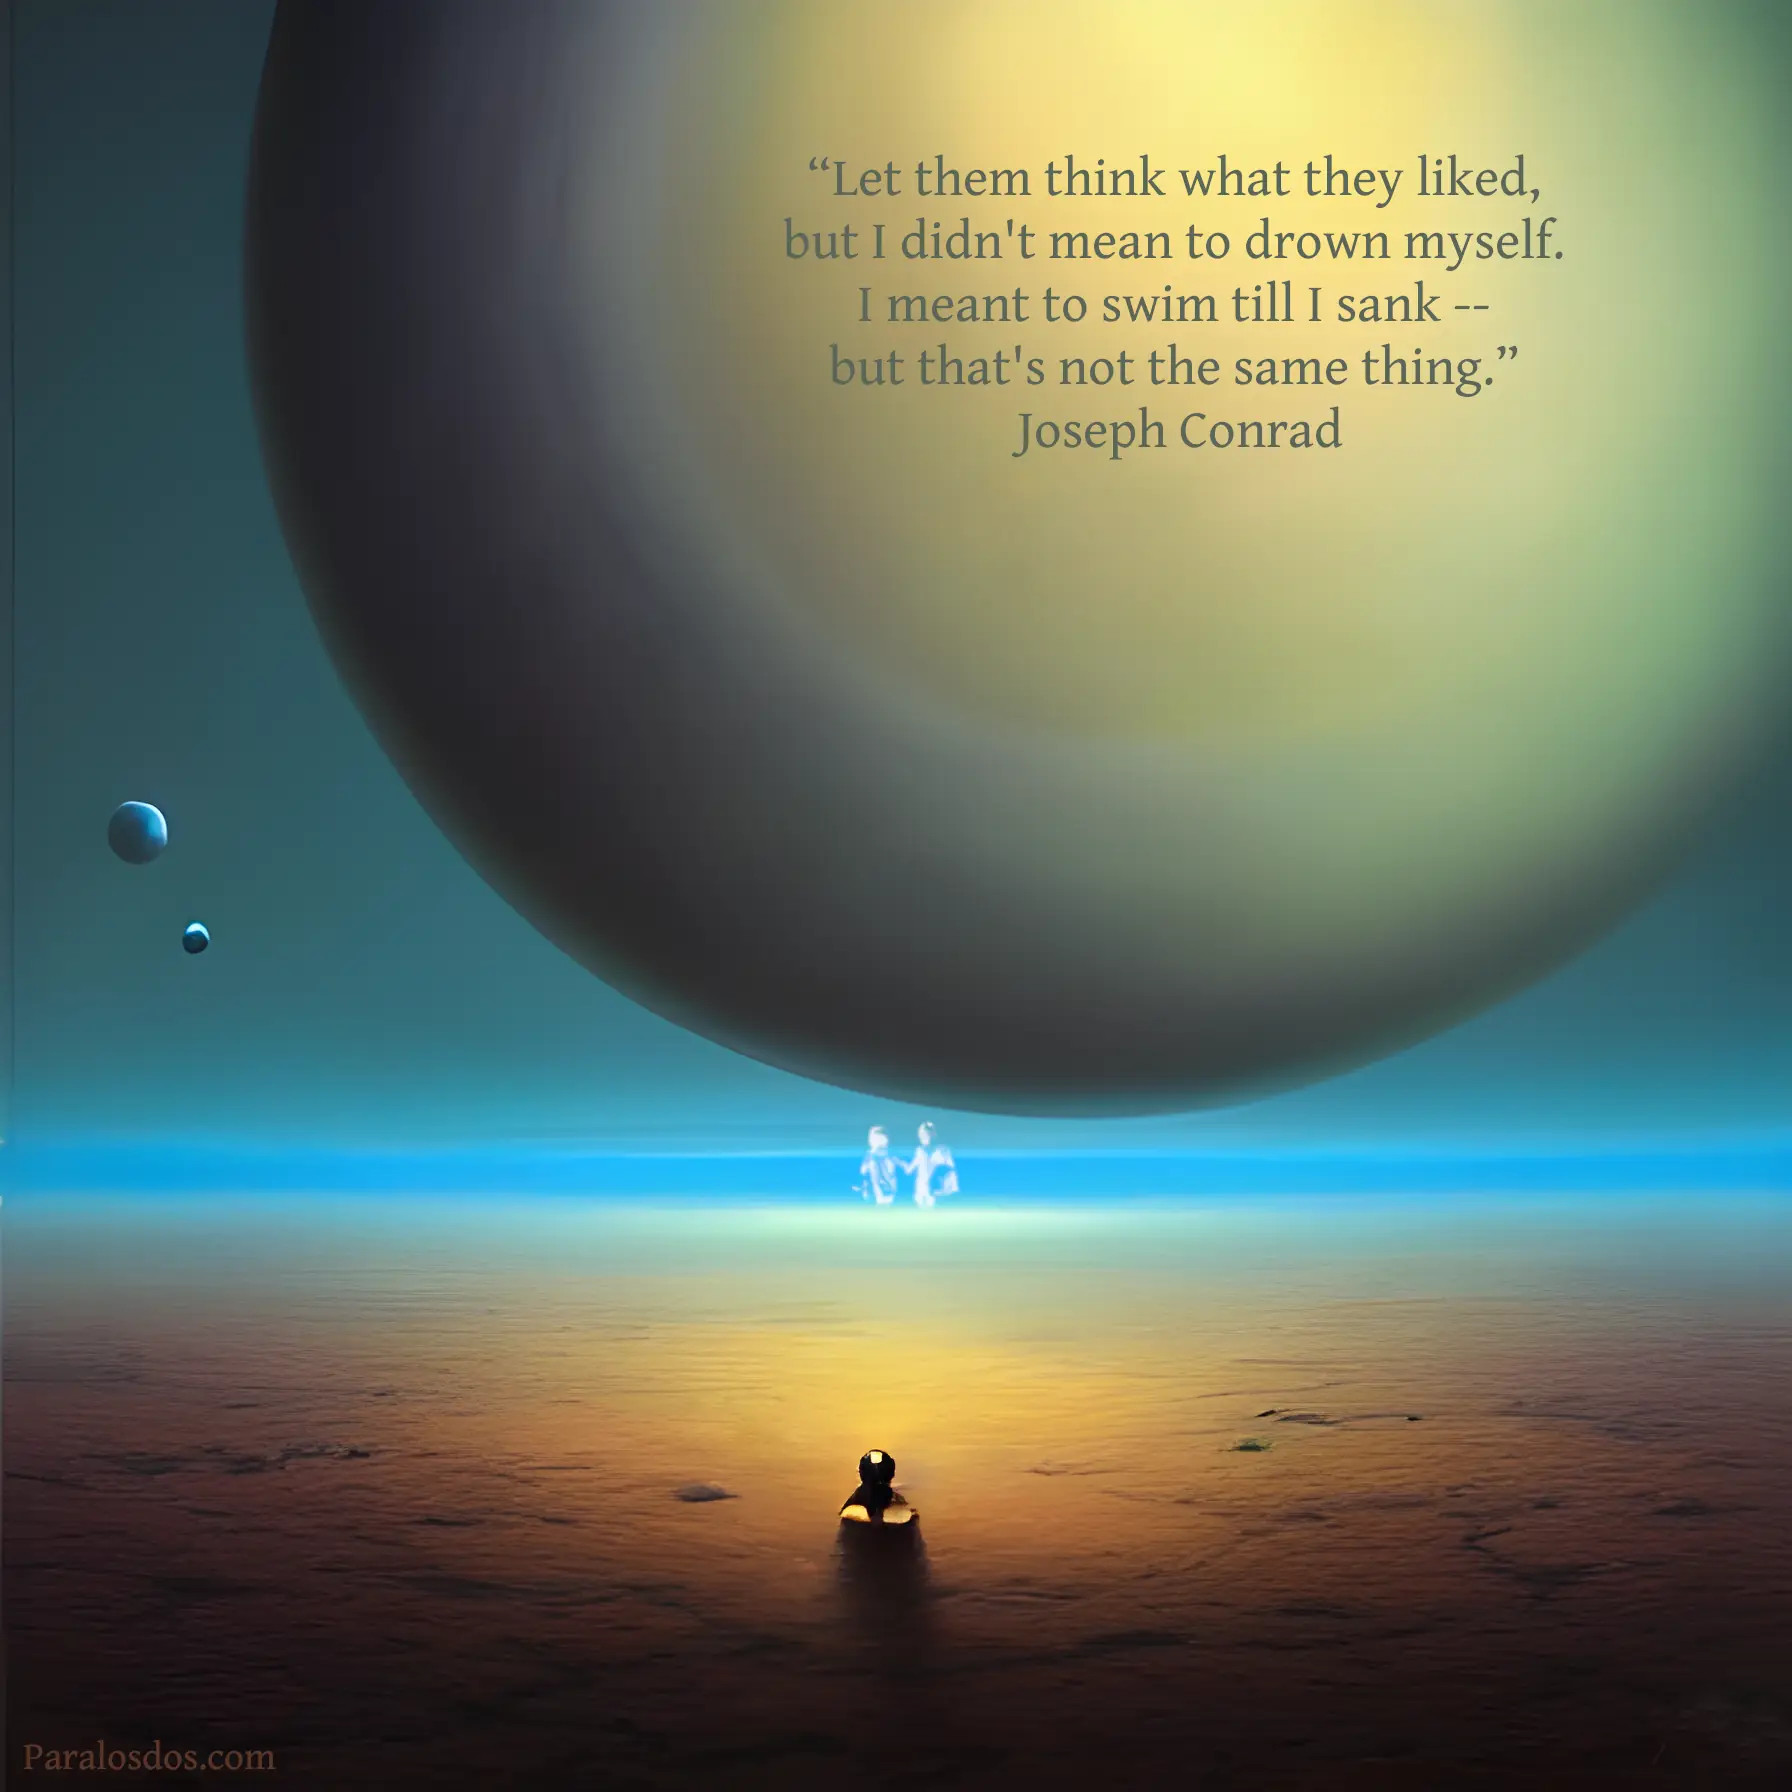 An artistic rendering of a figure standing on a very small, bare, island. There looks to be some sort of alien craft in the sky. The quote reads: “Let them think what they liked, but I didn't mean to drown myself. I meant to swim till I sank -- but that's not the same thing.” Joseph Conrad